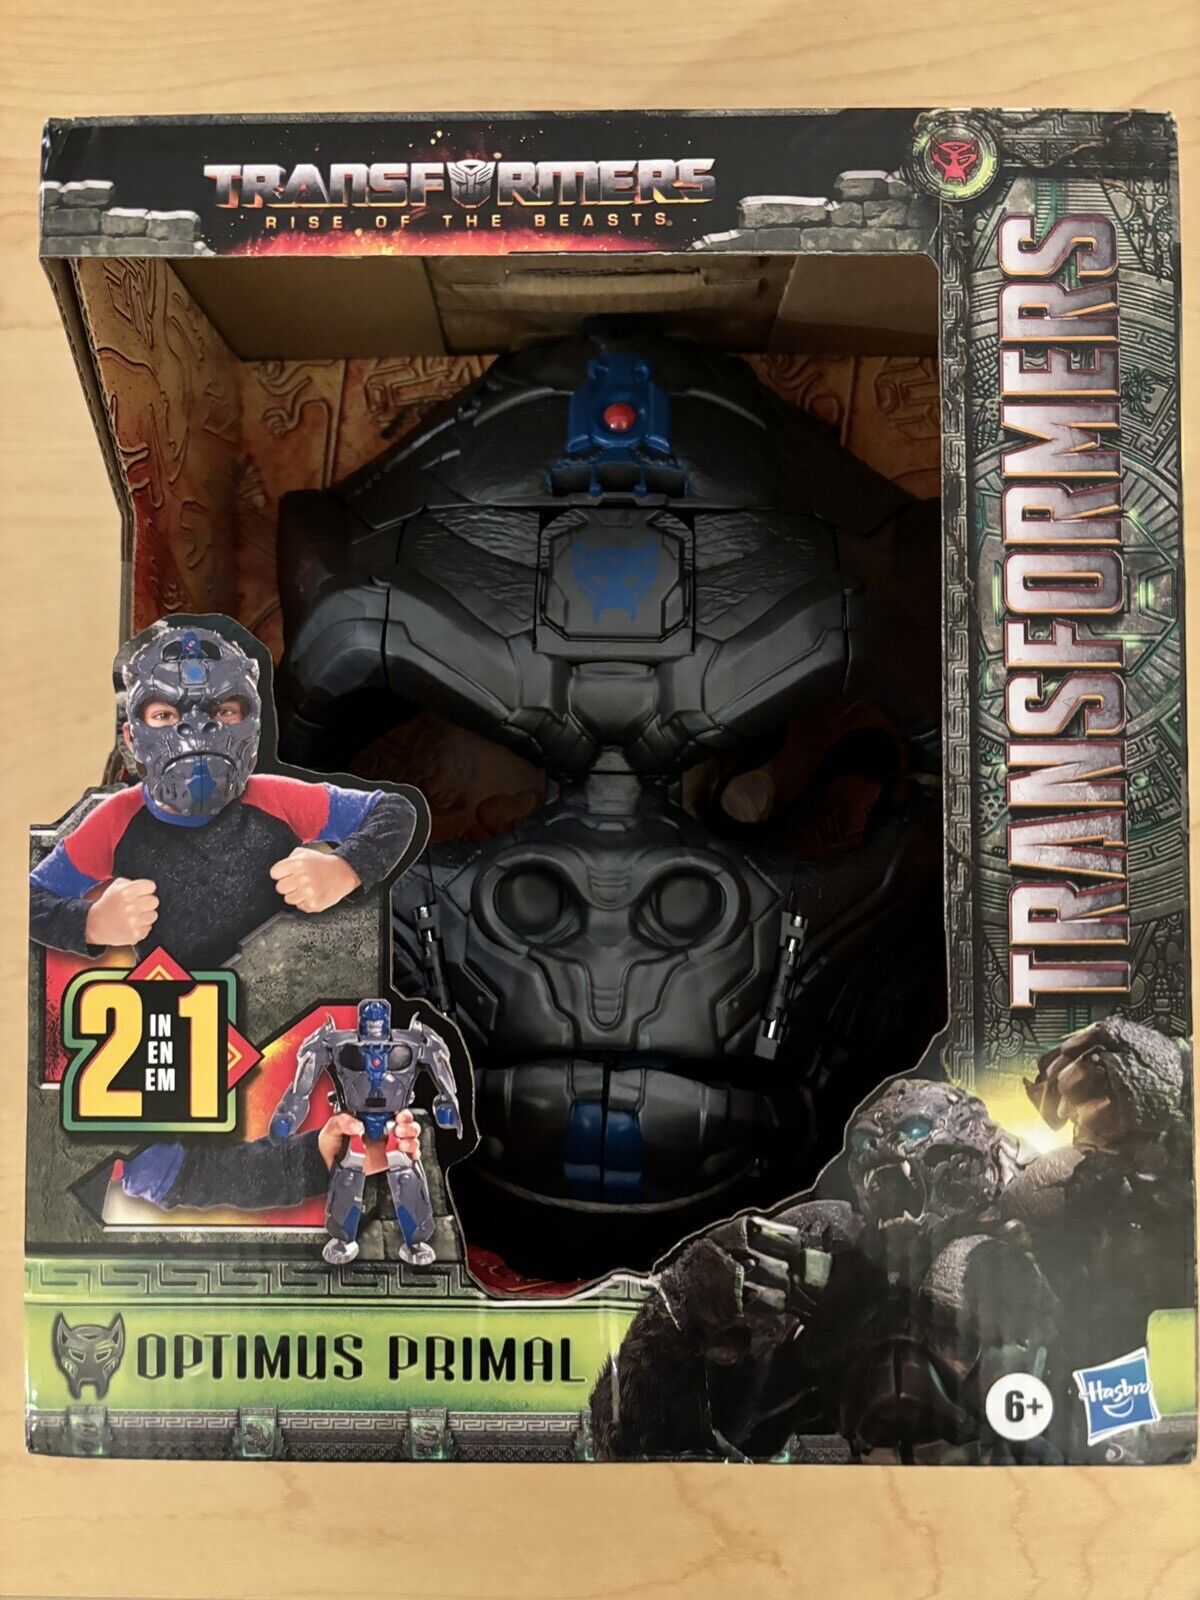 Transformers Optimus Primal, 2-in-1 Converting Mask Action Figure Rise Of Beasts